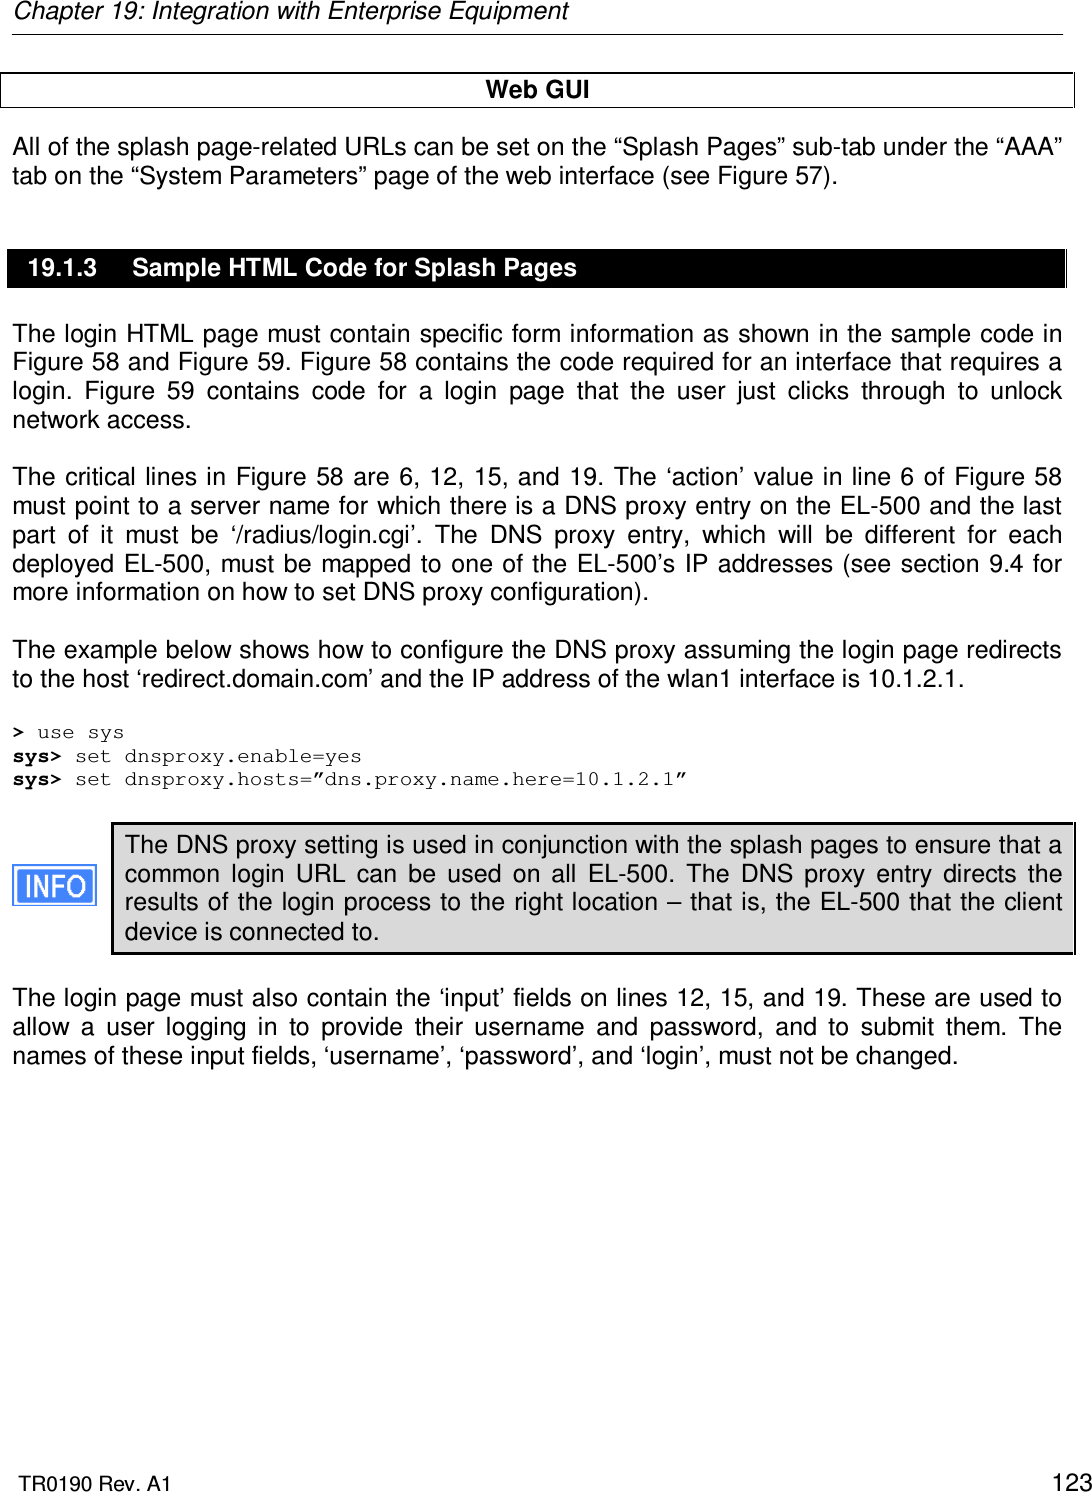 Chapter 19: Integration with Enterprise Equipment  TR0190 Rev. A1    123 Web GUI All of the splash page-related URLs can be set on the “Splash Pages” sub-tab under the “AAA” tab on the “System Parameters” page of the web interface (see Figure 57). 19.1.3  Sample HTML Code for Splash Pages The login HTML page must contain specific form information as shown in the sample code in Figure 58 and Figure 59. Figure 58 contains the code required for an interface that requires a login.  Figure  59  contains  code  for  a  login  page  that  the  user  just  clicks  through  to  unlock network access.   The critical lines in Figure 58 are 6, 12, 15, and 19. The ‘action’ value in line 6 of Figure 58 must point to a server name for which there is a DNS proxy entry on the EL-500 and the last part  of  it  must  be  ‘/radius/login.cgi’.  The  DNS  proxy  entry,  which  will  be  different  for  each deployed EL-500, must be mapped to one of the EL-500’s IP addresses (see section 9.4 for more information on how to set DNS proxy configuration).   The example below shows how to configure the DNS proxy assuming the login page redirects to the host ‘redirect.domain.com’ and the IP address of the wlan1 interface is 10.1.2.1.  &gt; use sys sys&gt; set dnsproxy.enable=yes sys&gt; set dnsproxy.hosts=”dns.proxy.name.here=10.1.2.1”  The DNS proxy setting is used in conjunction with the splash pages to ensure that a common  login  URL  can  be  used  on  all  EL-500.  The  DNS  proxy  entry  directs  the results of the login process to the right location – that is, the EL-500 that the client device is connected to.  The login page must also contain the ‘input’ fields on lines 12, 15, and 19. These are used to allow  a  user  logging  in  to  provide  their  username  and  password,  and  to  submit  them.  The names of these input fields, ‘username’, ‘password’, and ‘login’, must not be changed.   